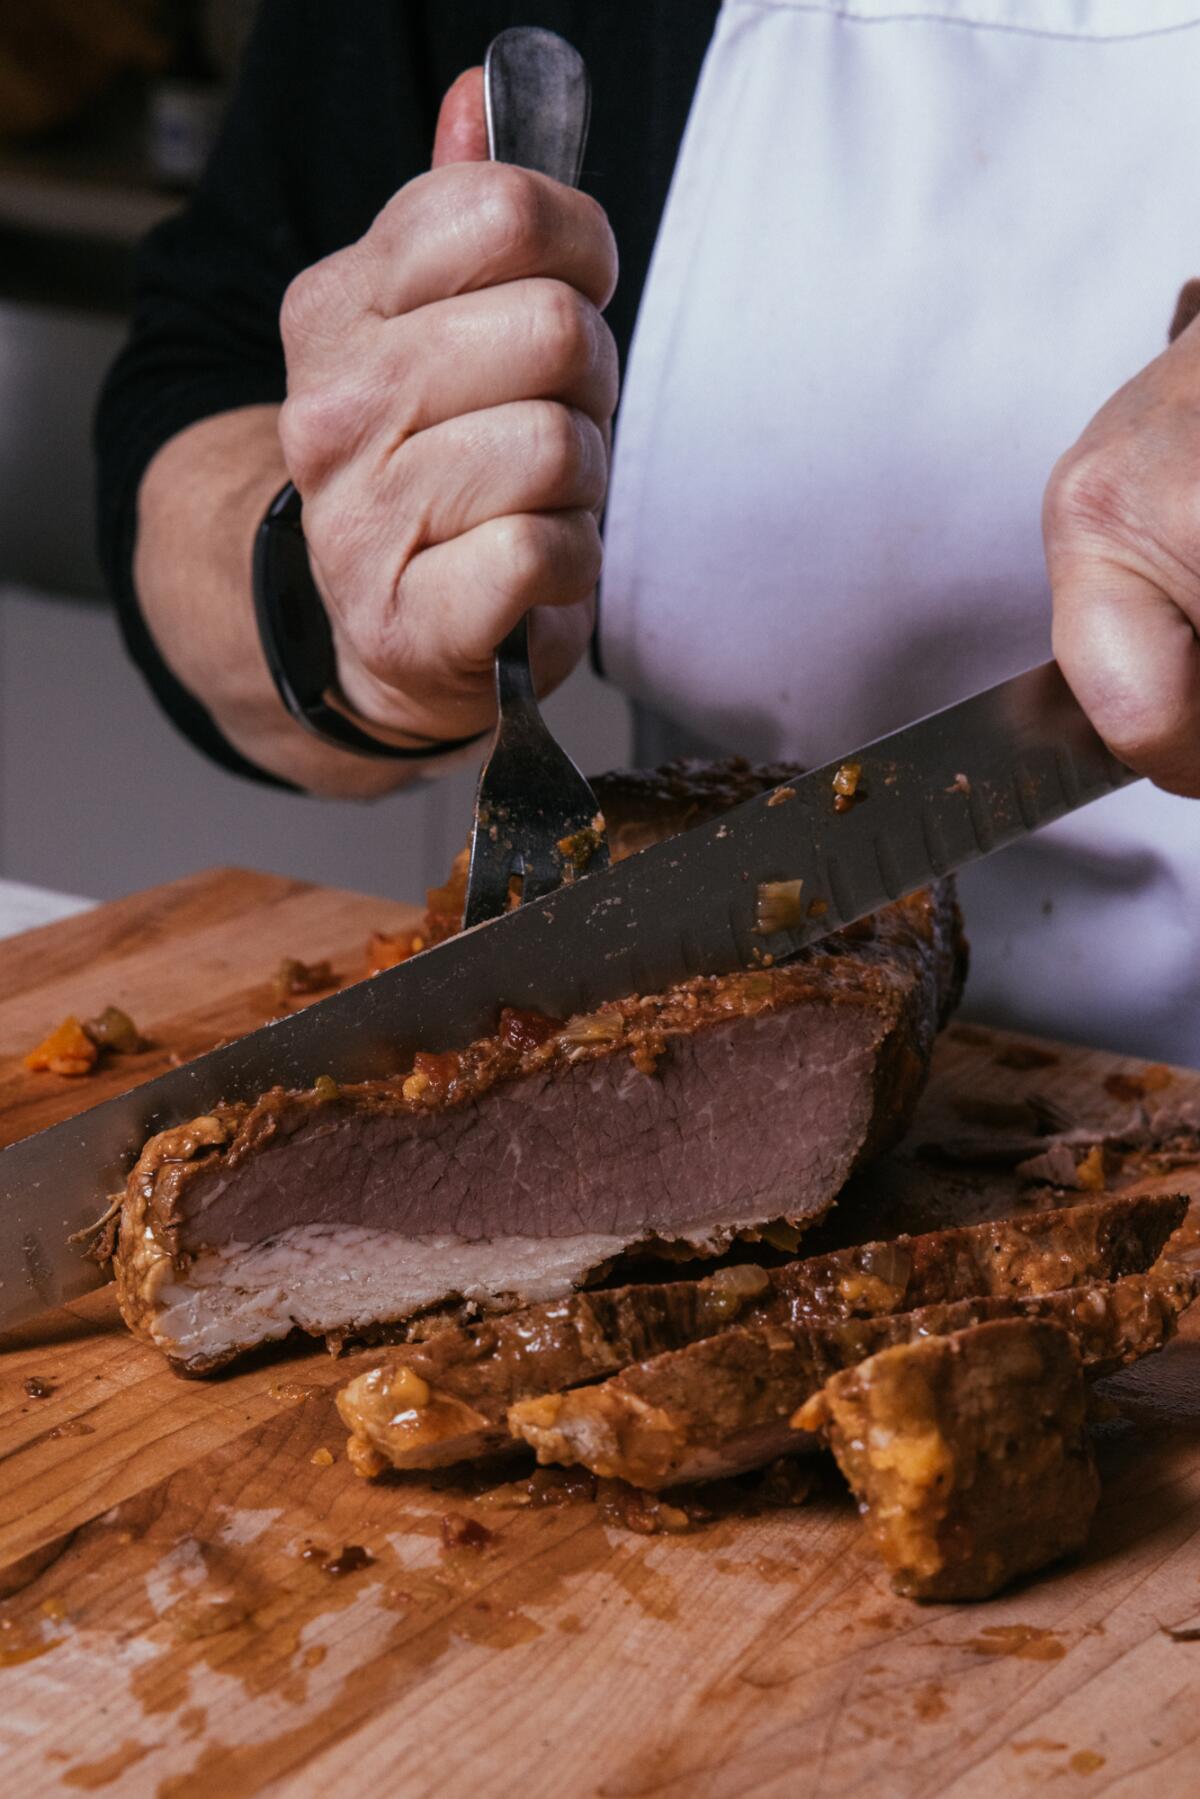 Brisket is sliced at the Los Angeles Times' studio kitchen.